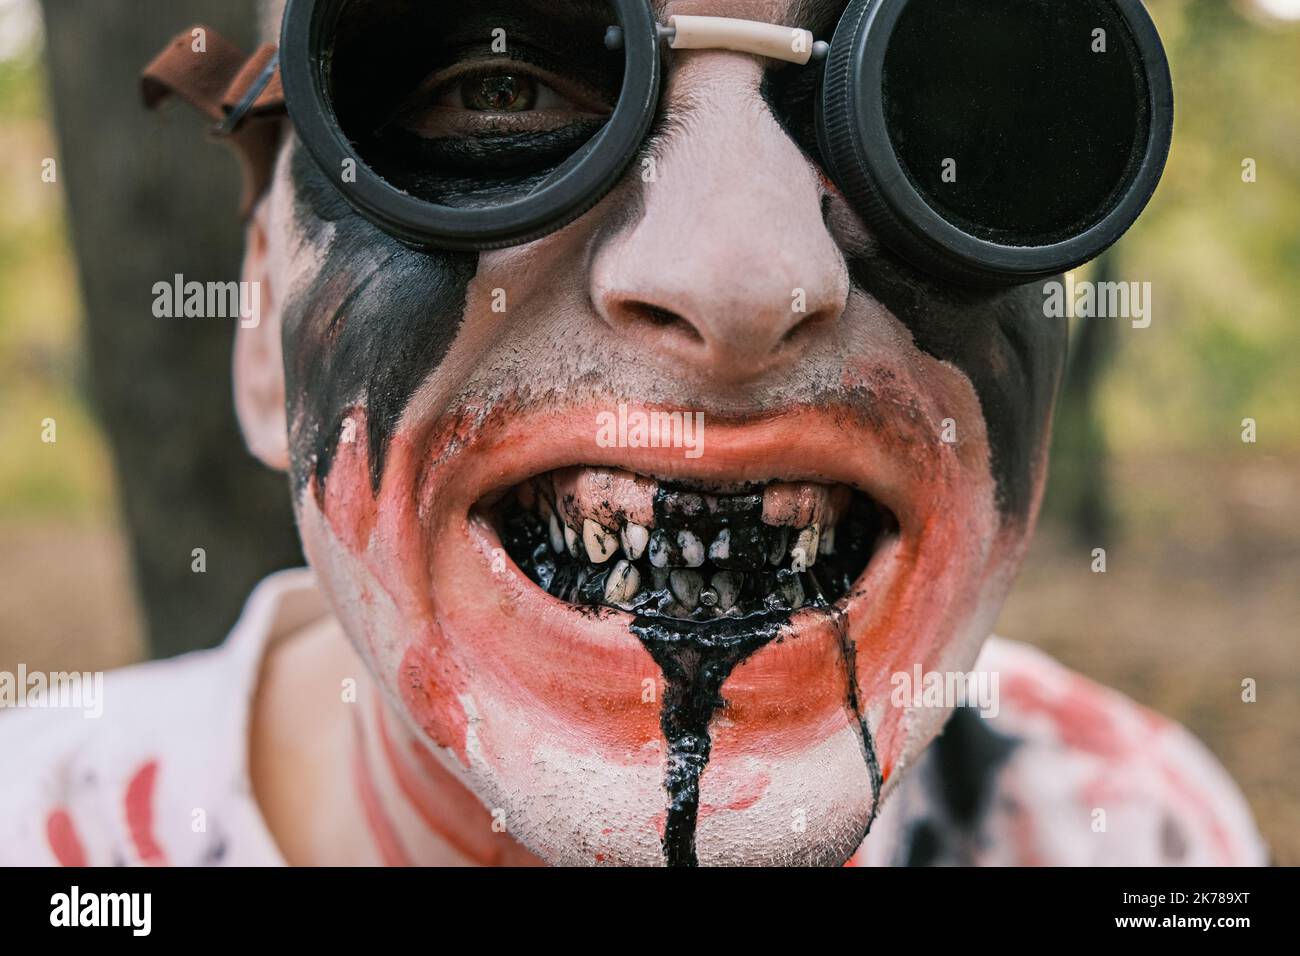 Close-up portrait of face of zombie with traces of blood and black fluid flowing from the mouth. Man with makeup with aviation glasses with broken Stock Photo